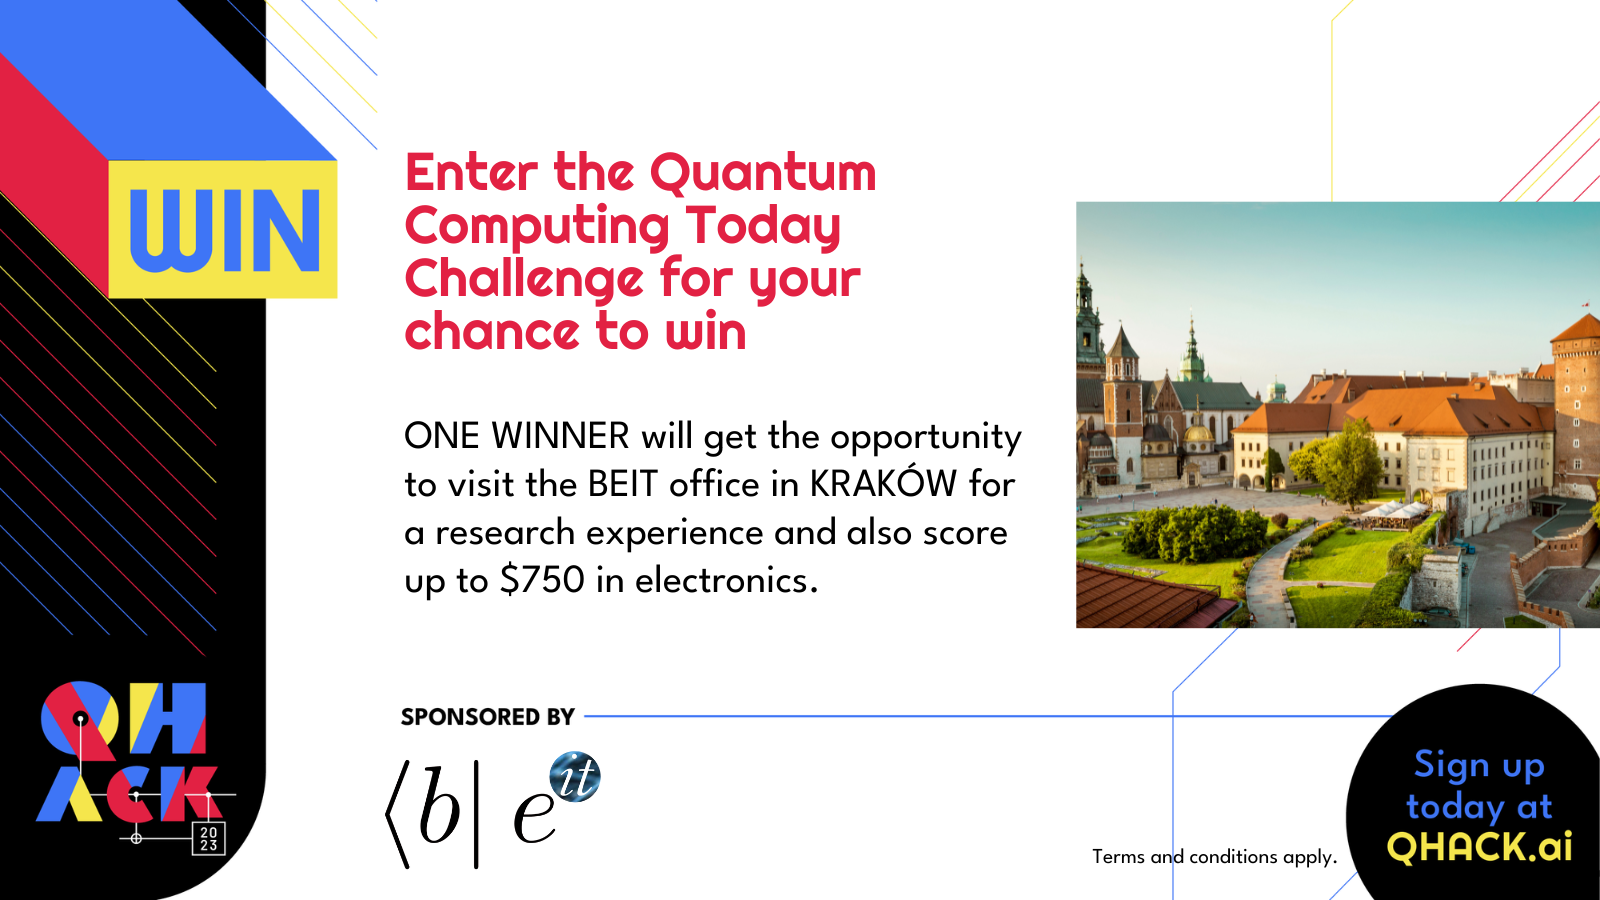 Enter the Quantum Computing Today Challenge for chance to win. One winner will get the opportunity to visit the BEIT office in Kraków for a research experience and also score up to $750 in electronics. Sponsored by BEIT.